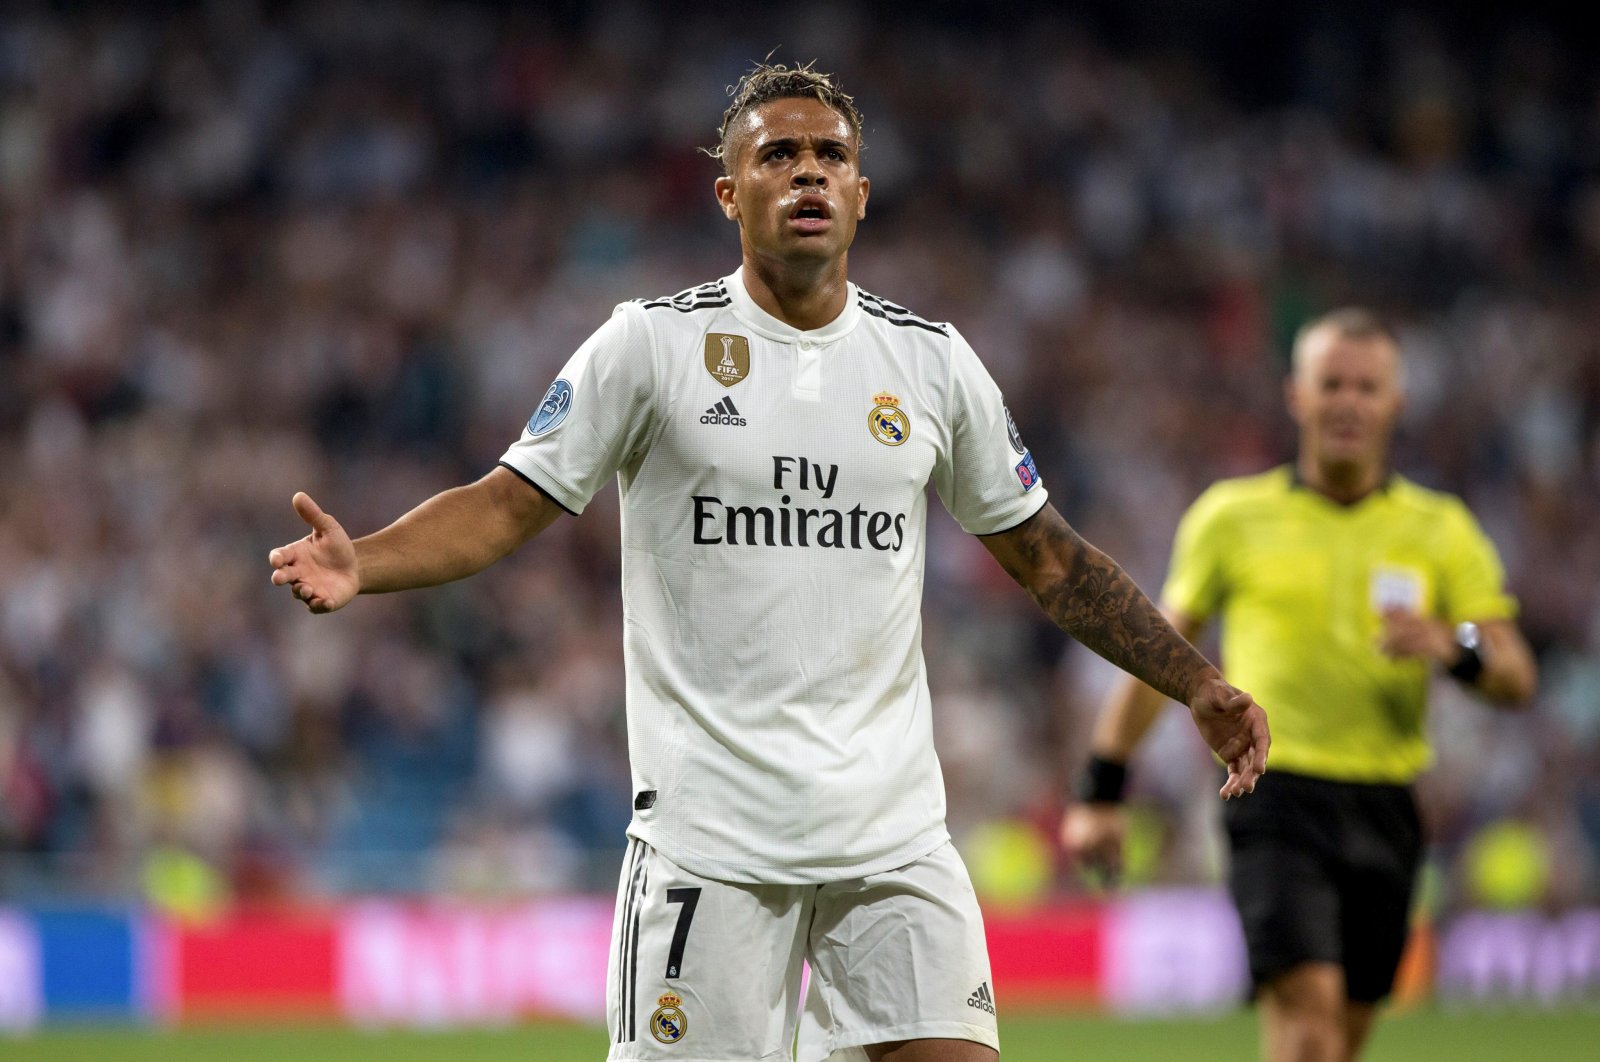 In this file photo, Real Madrid's Mariano Diaz celebrates a goal during the UEFA Champions League group stage match between Real Madrid and AS Roma at Santiago Bernabeu, in Madrid, Sept. 19, 2018. (EPA Photo)